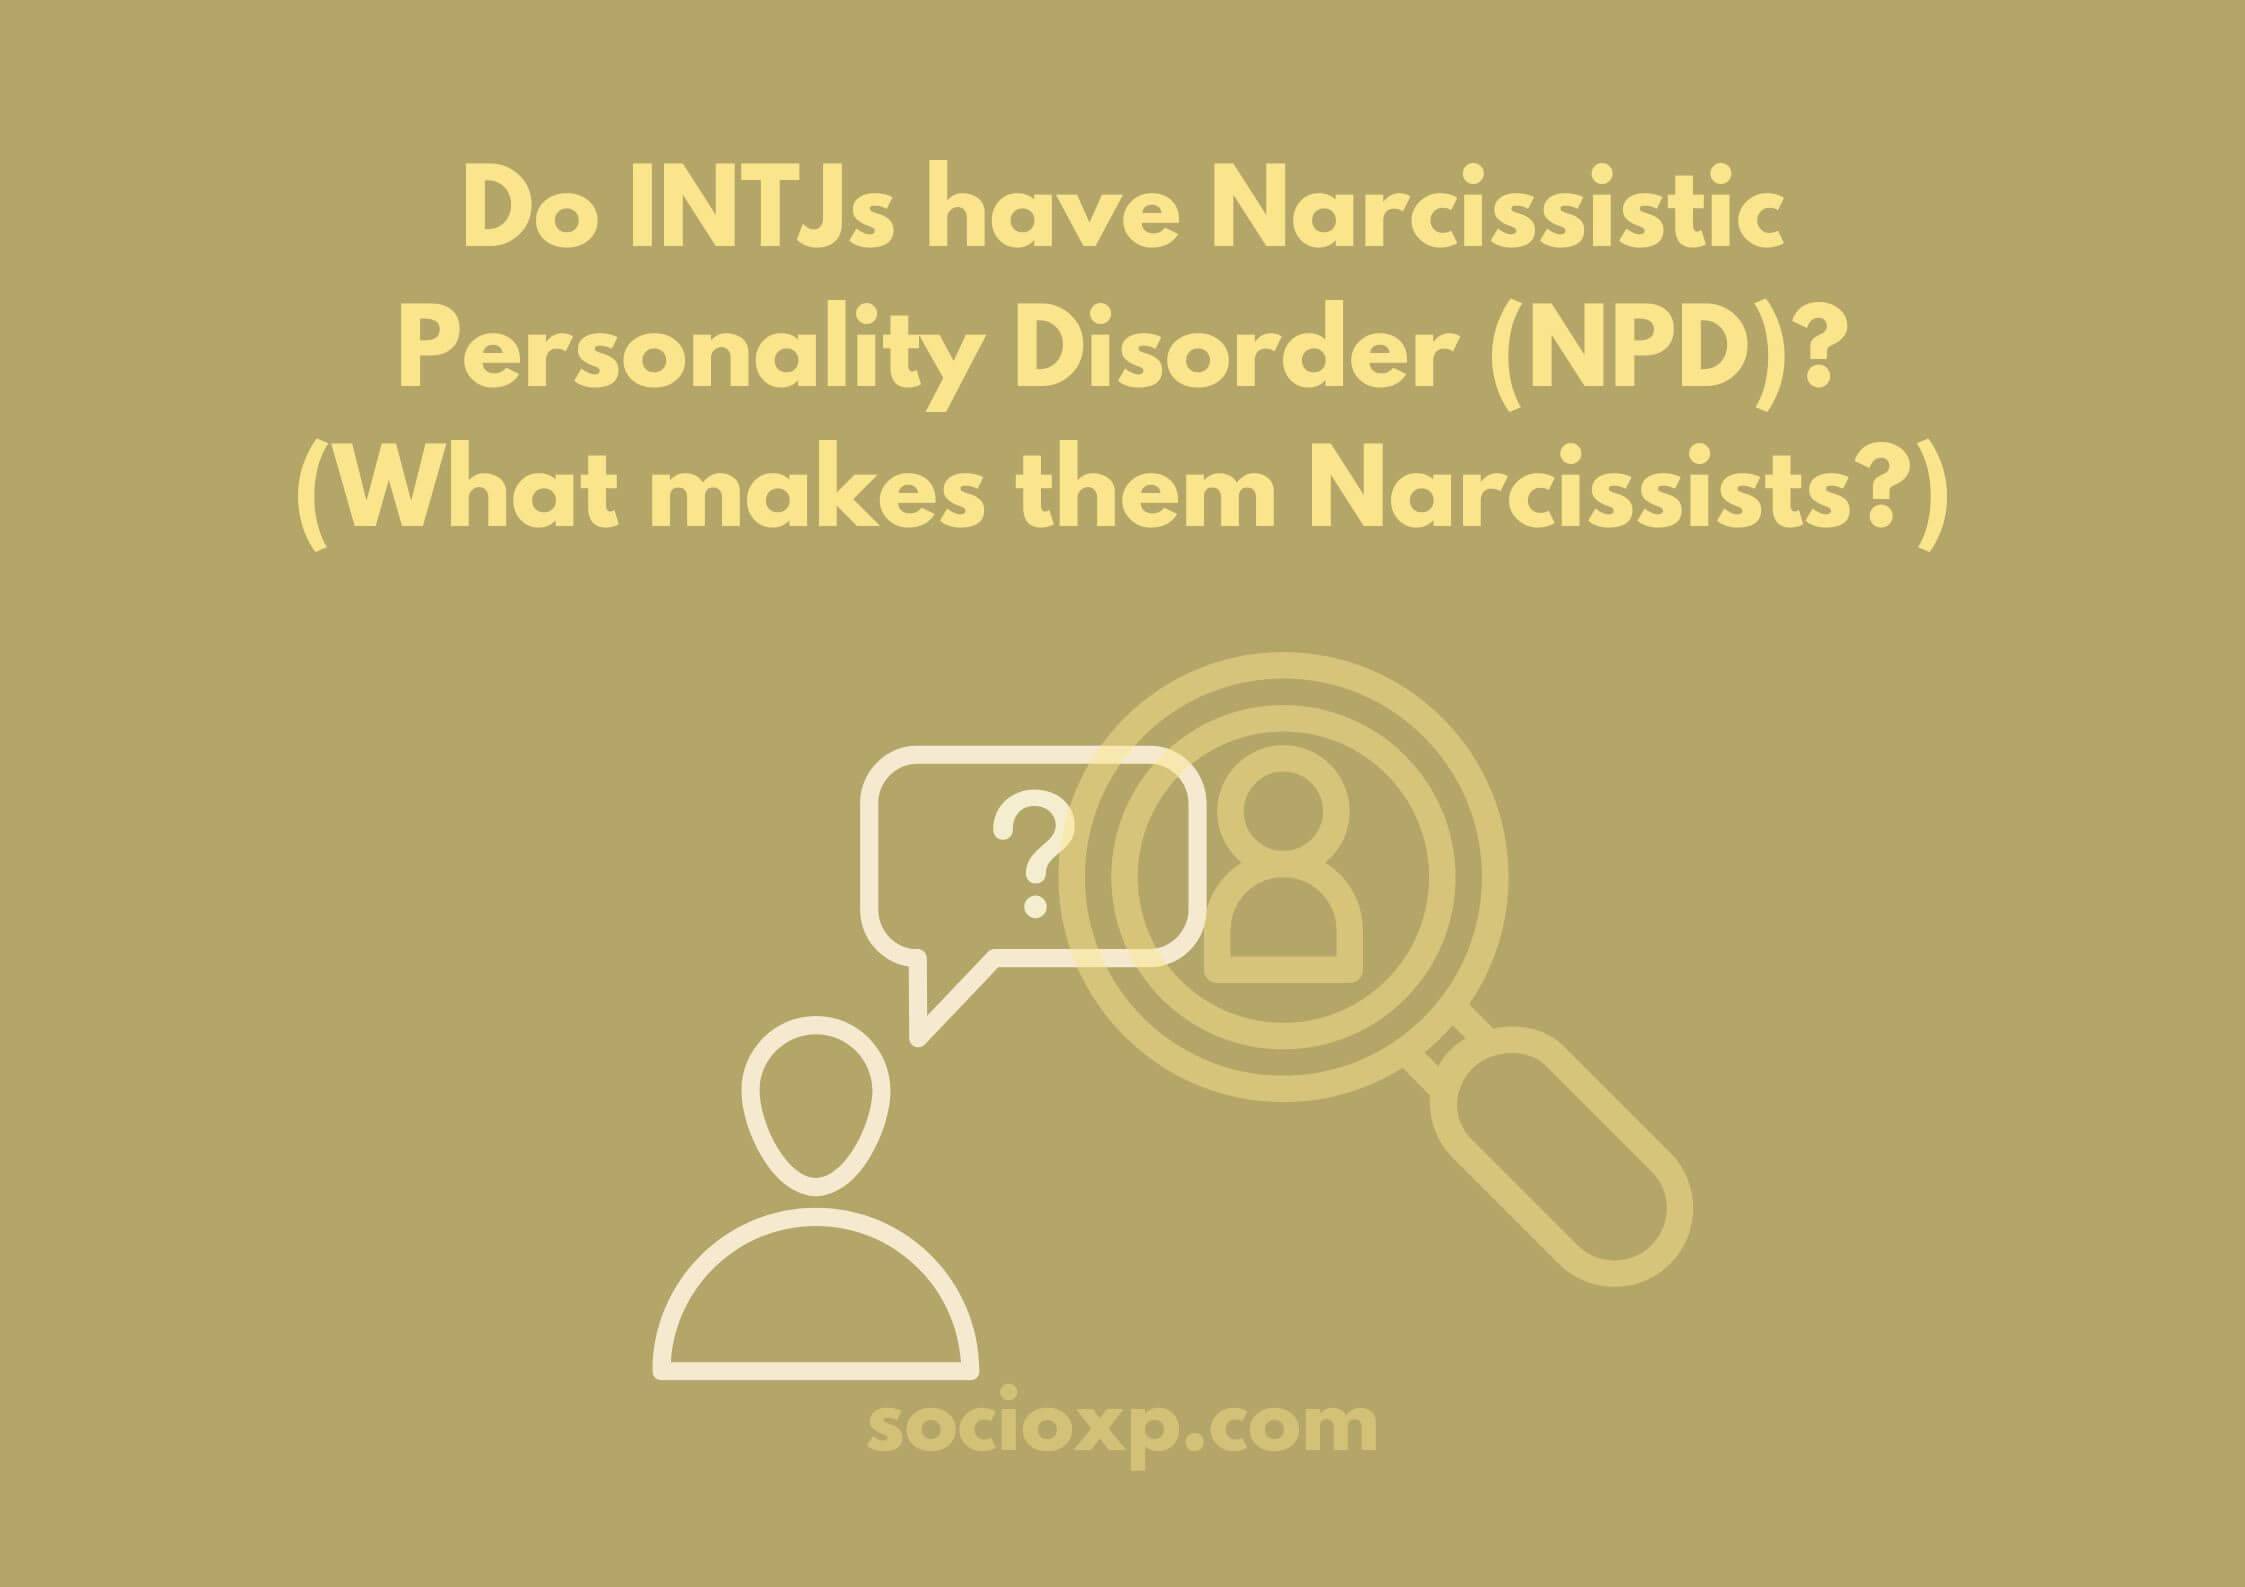 Do INTJs Have Narcissistic Personality Disorder (NPD)? (What Makes Them Narcissists?)